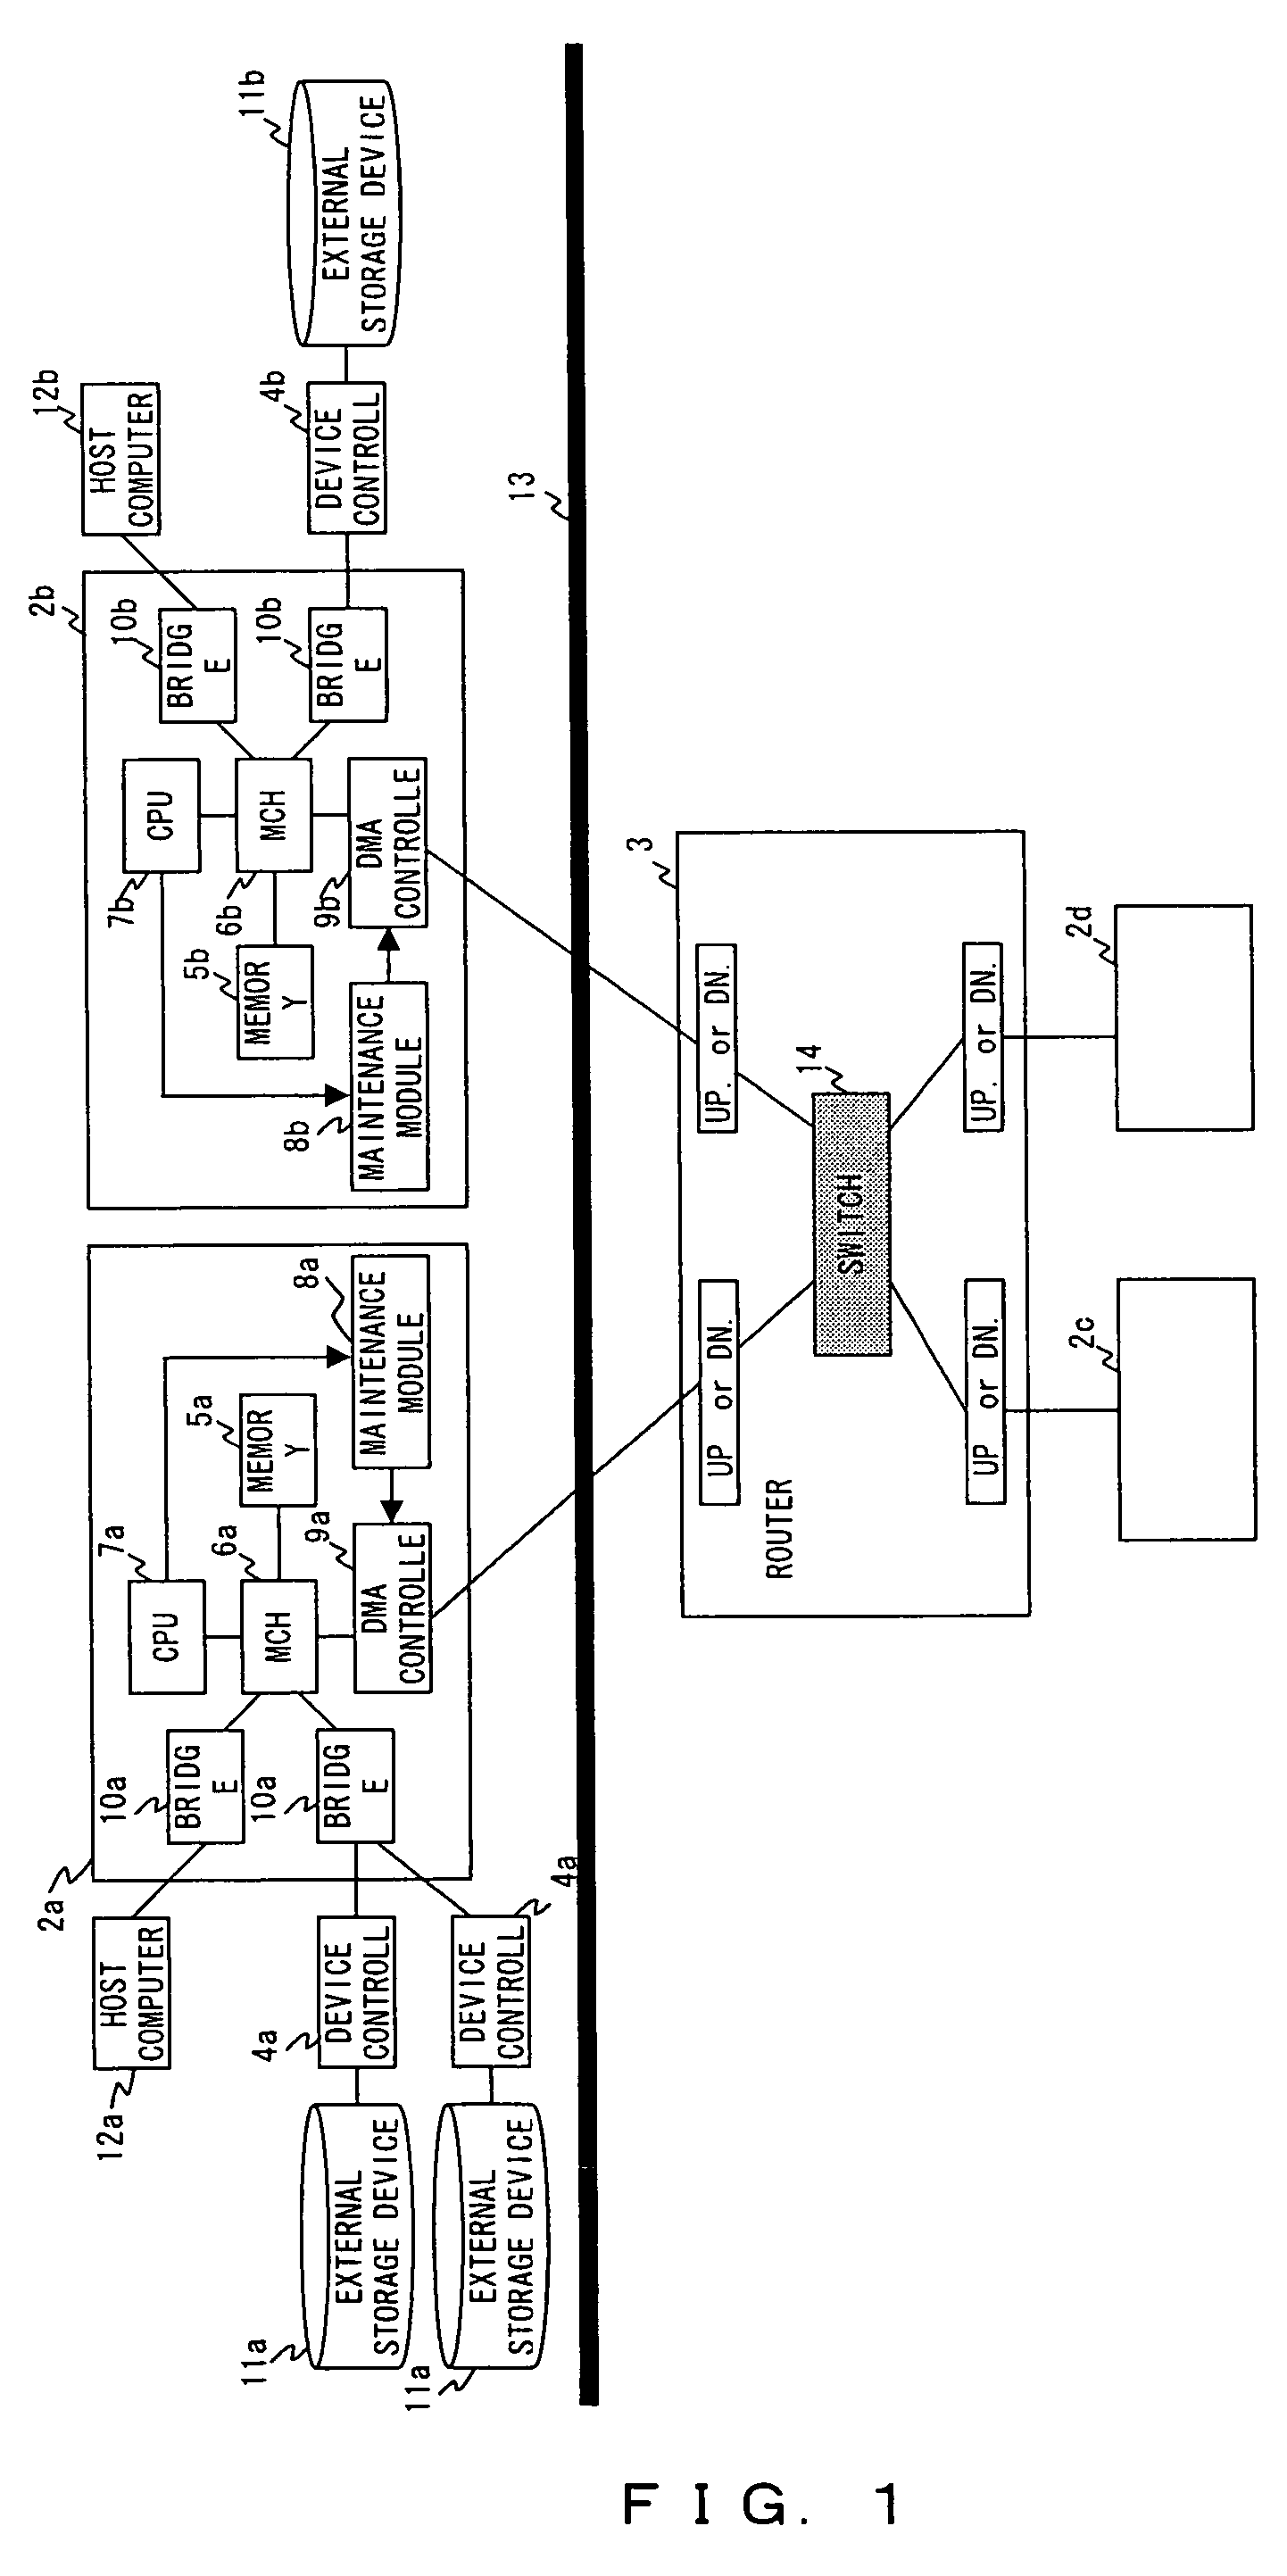 File control system and file control device